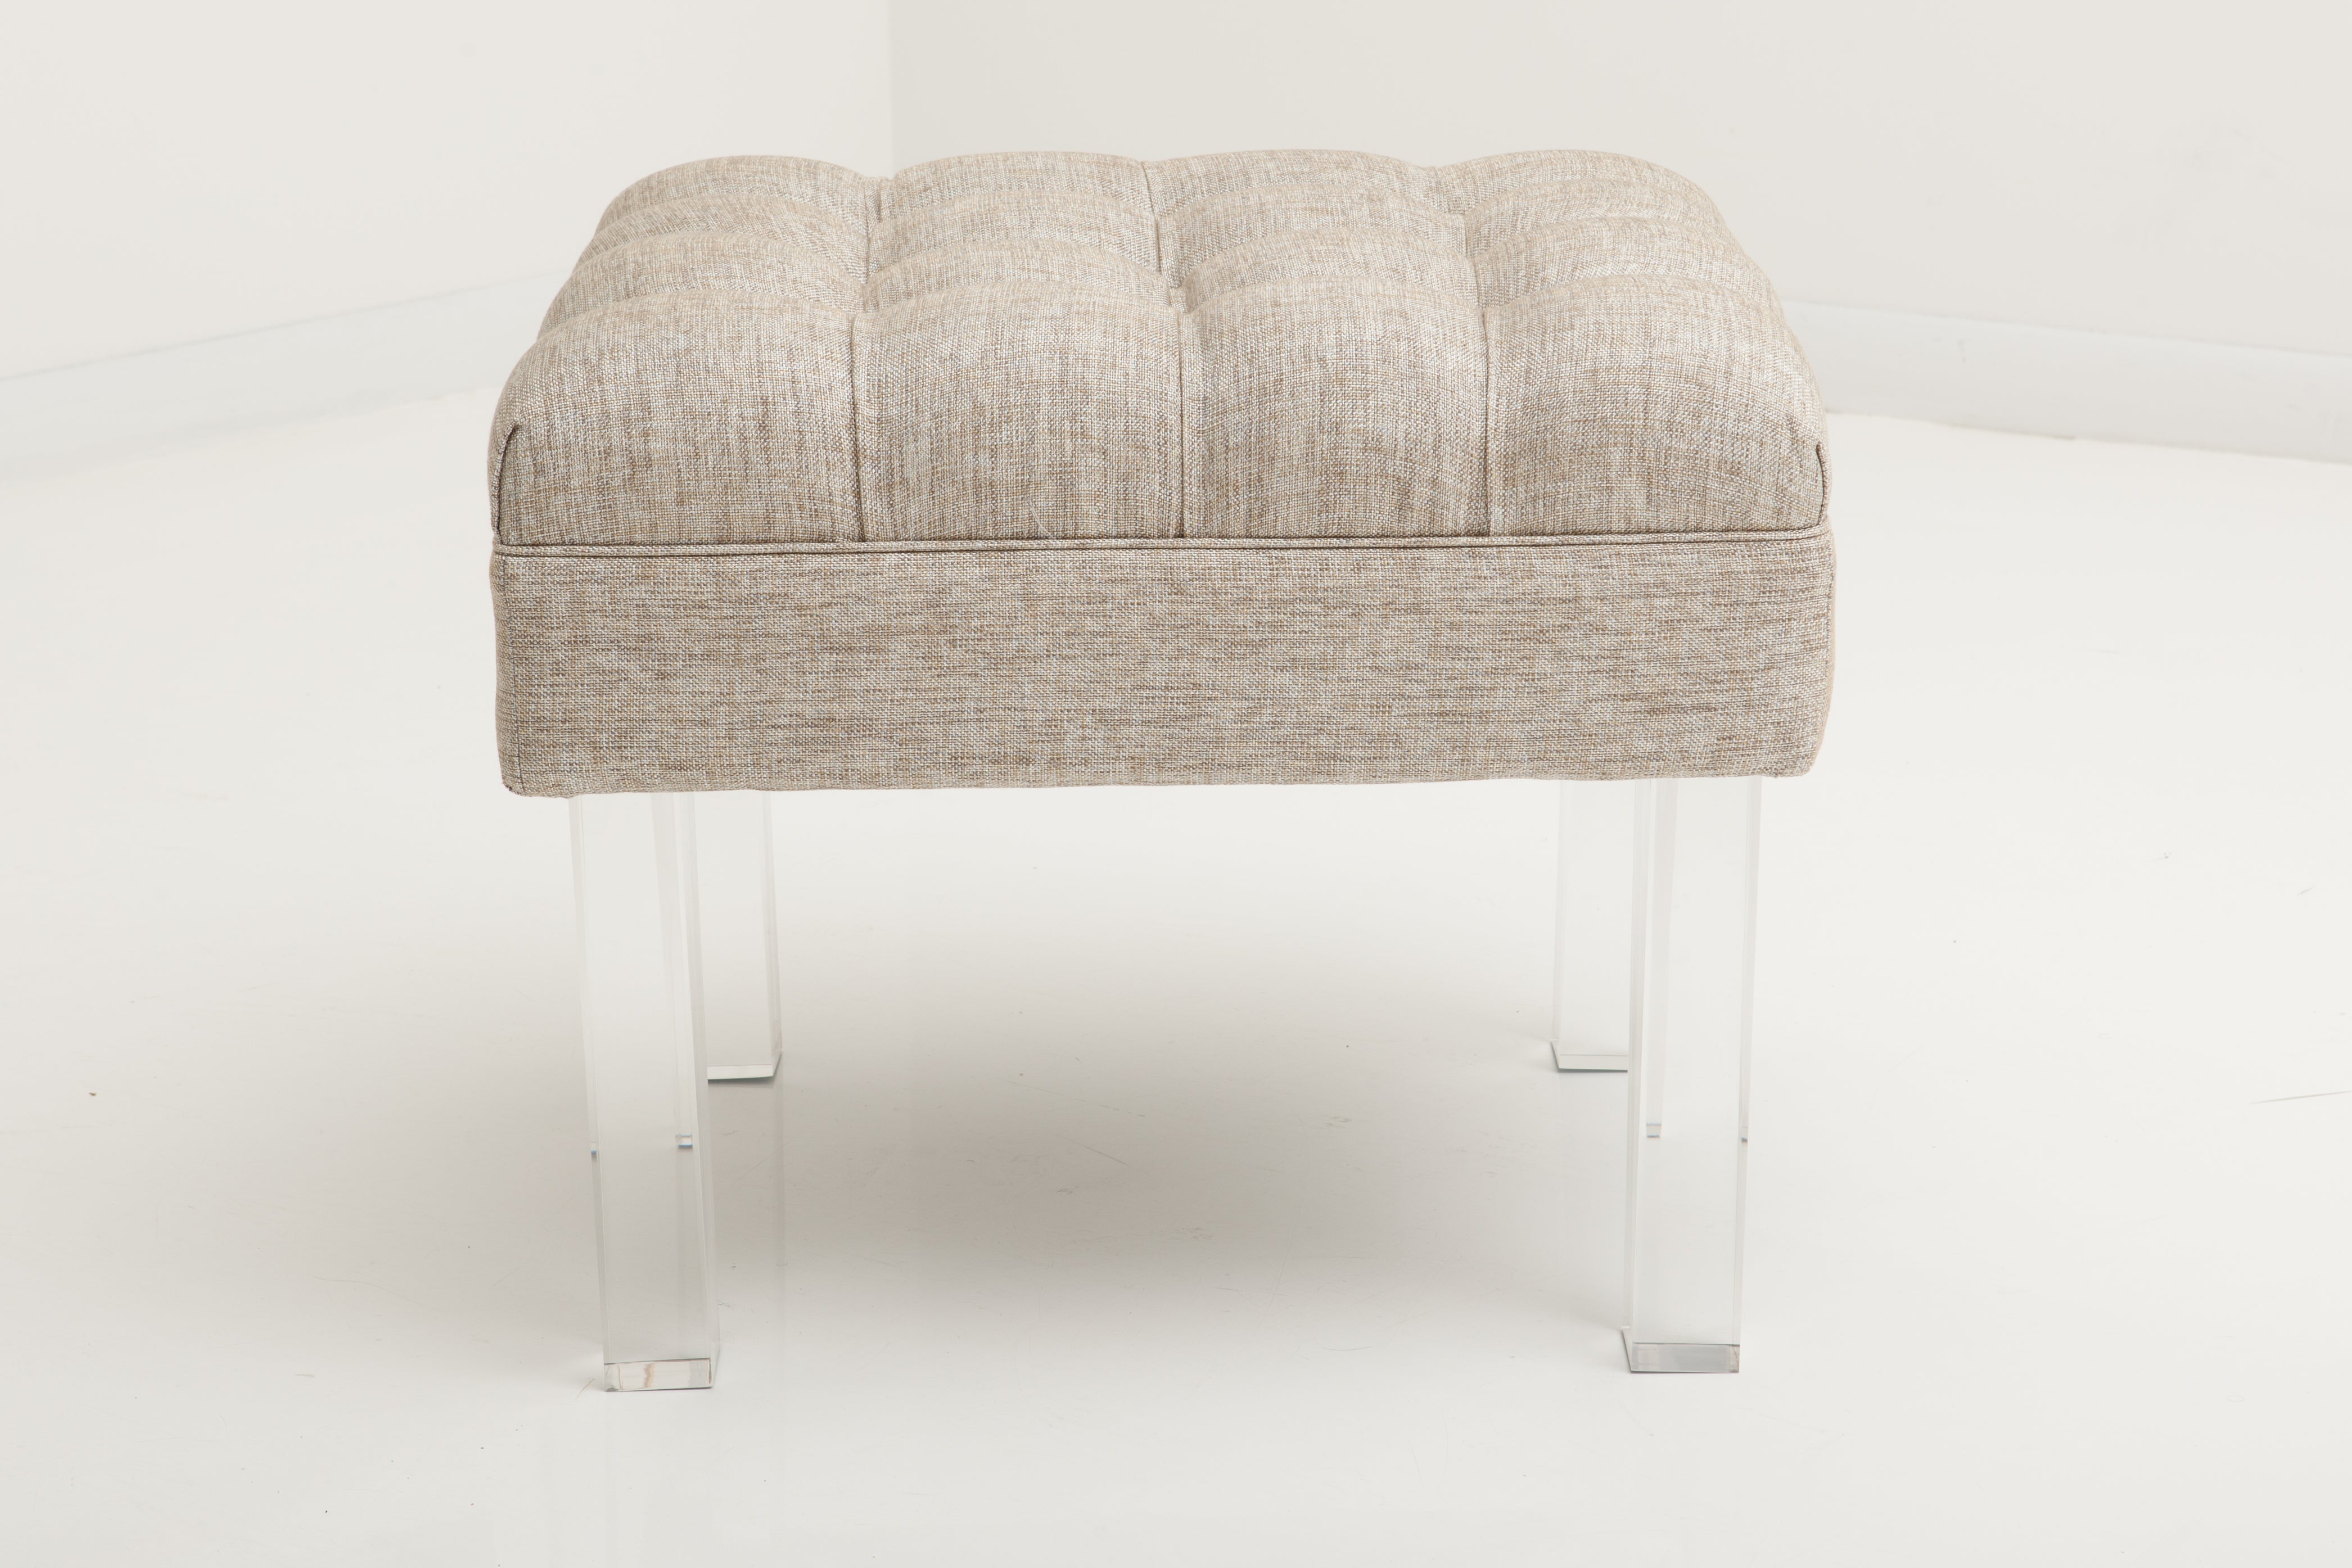 Tufted Ottoman with Lucite Legs